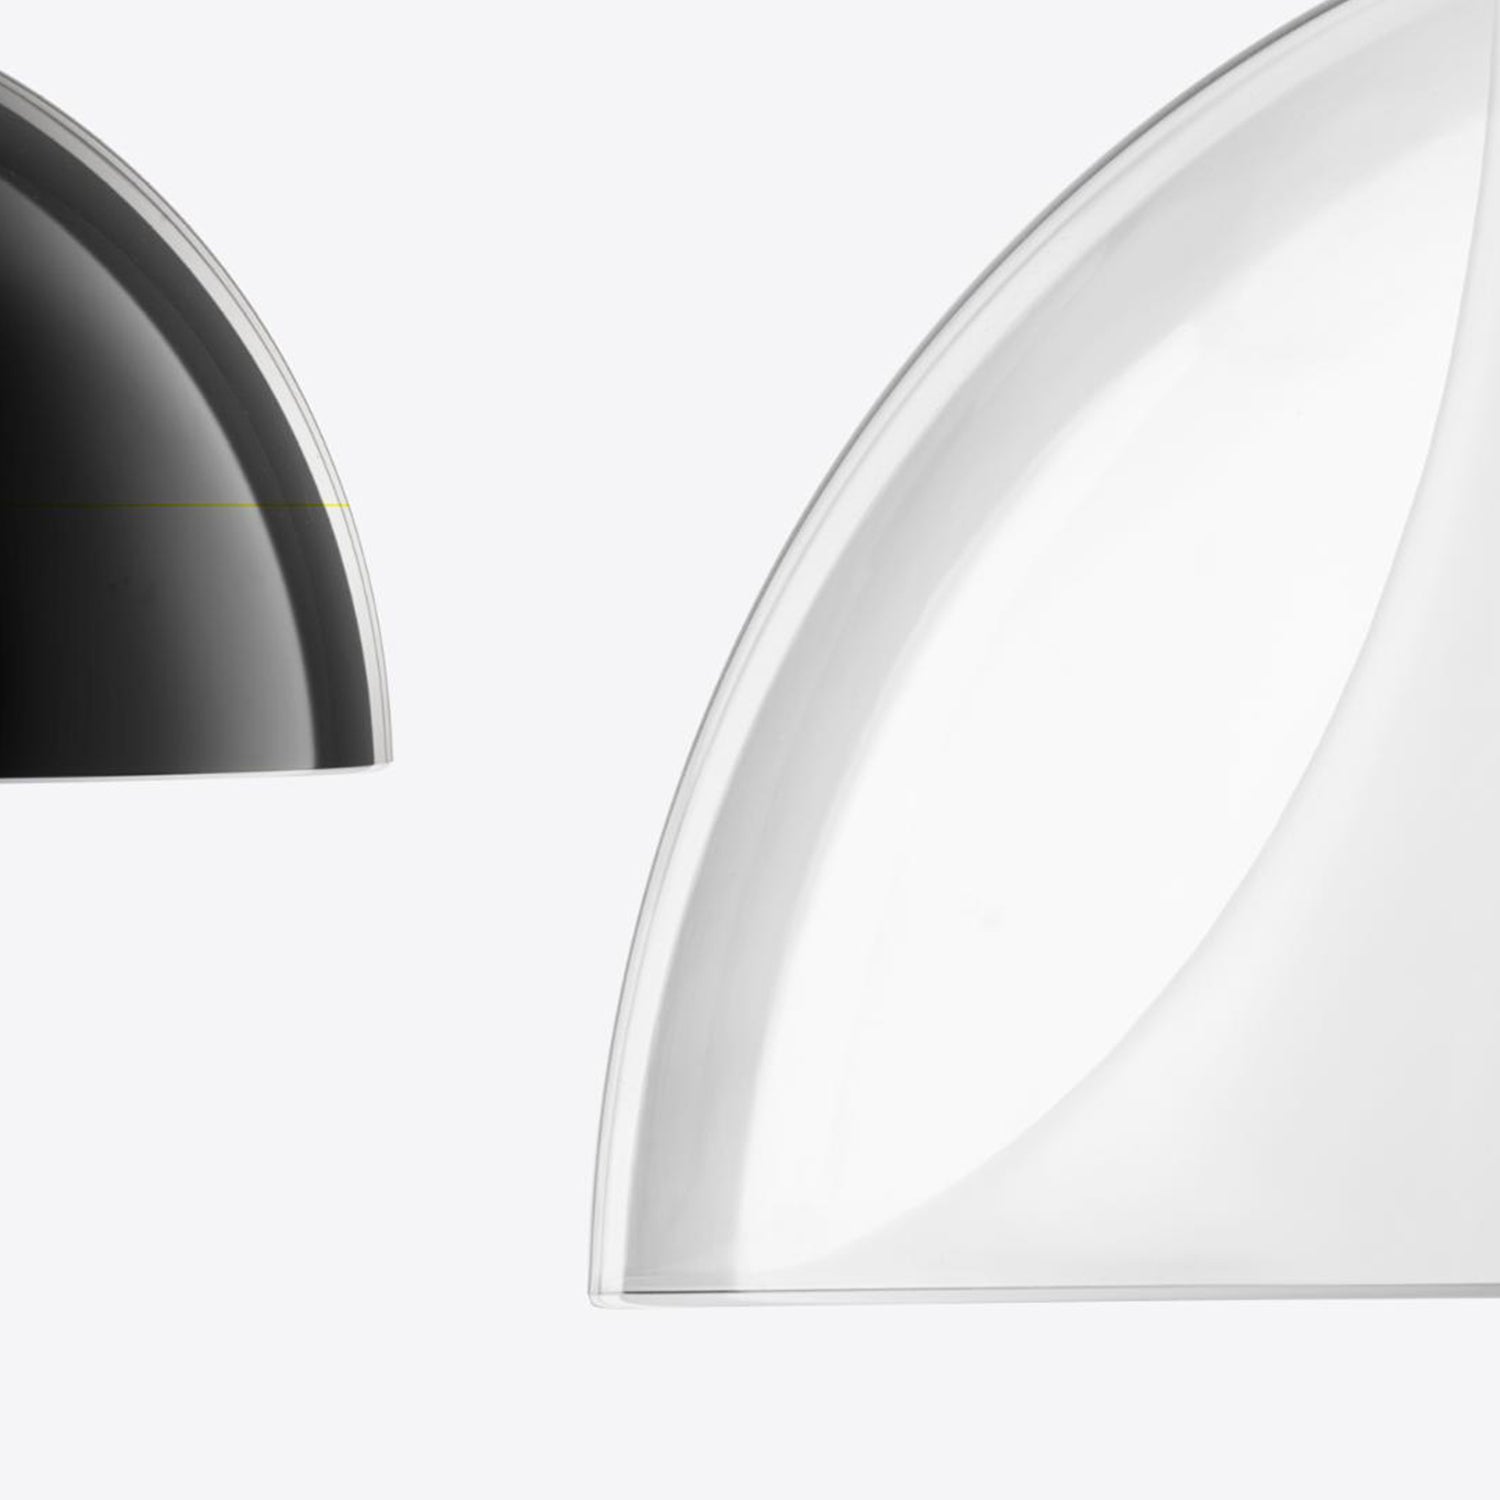 Pedrali L002 Wall lights in clear and black shades detail image